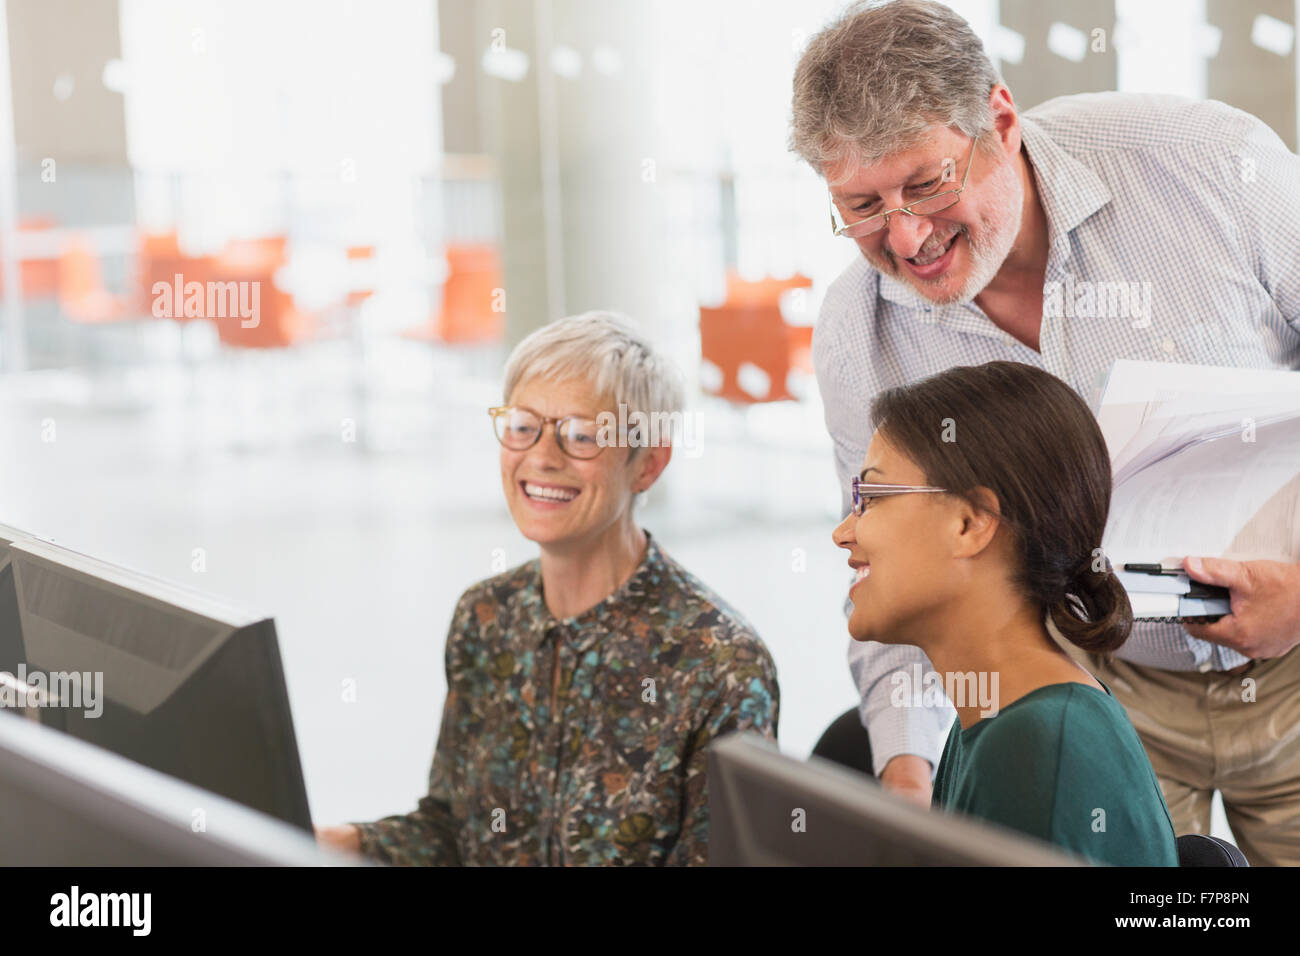 Smiling students talking at computer in adult education classroom Stock Photo